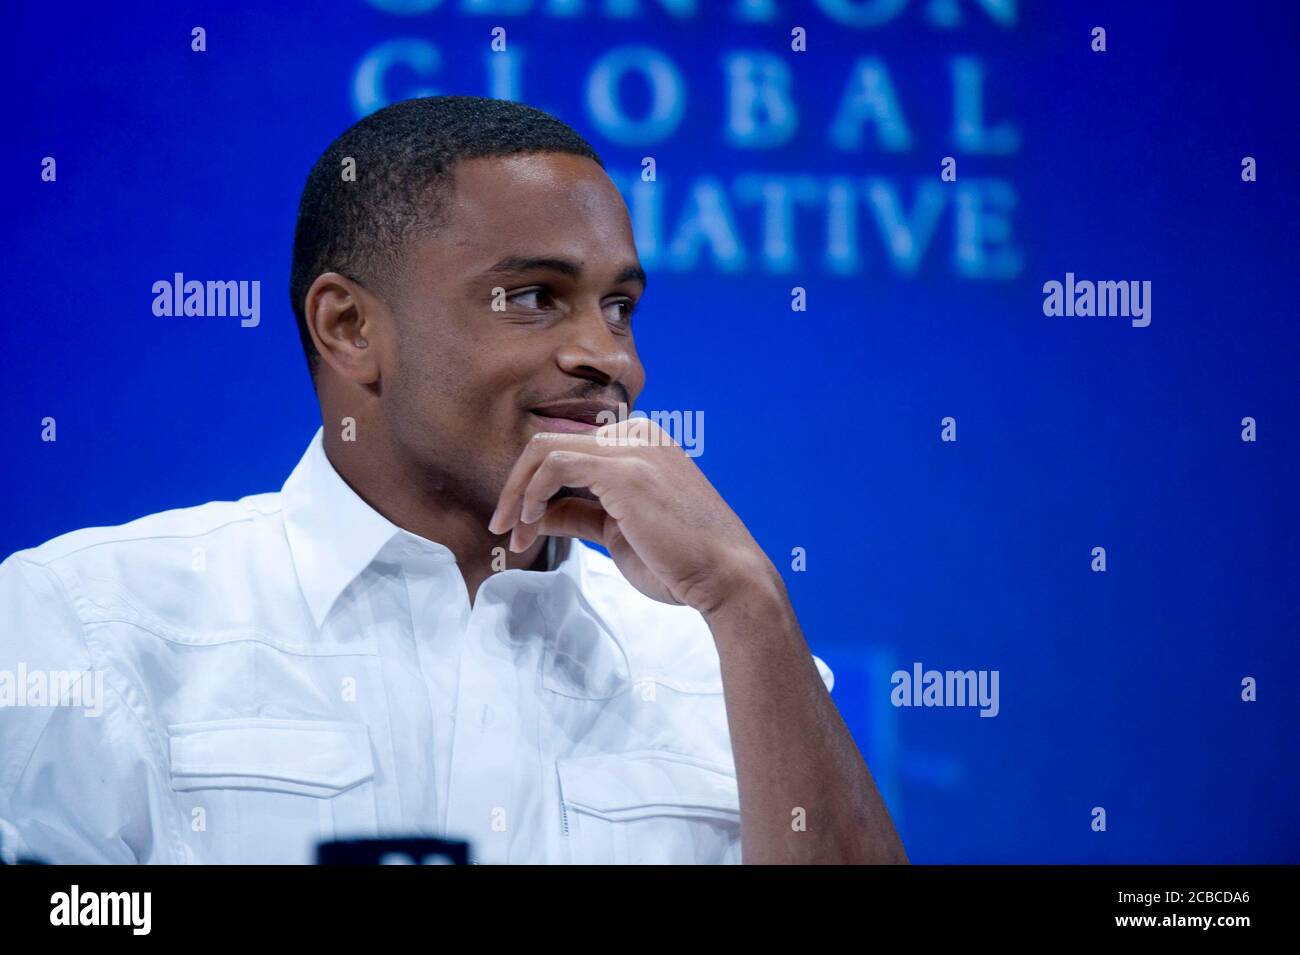 Austin, Texas USA, February 14, 2009:NFL football player Nnamdi Asomugha participates in a panel discussion at the second-annual Clinton Global Initiative University, a conference bringing together students to take action on global challenges such as poverty, hunger, energy, climate change and global health. The program was founded by former President Bill Clinton.  ©Bob Daemmrich Stock Photo